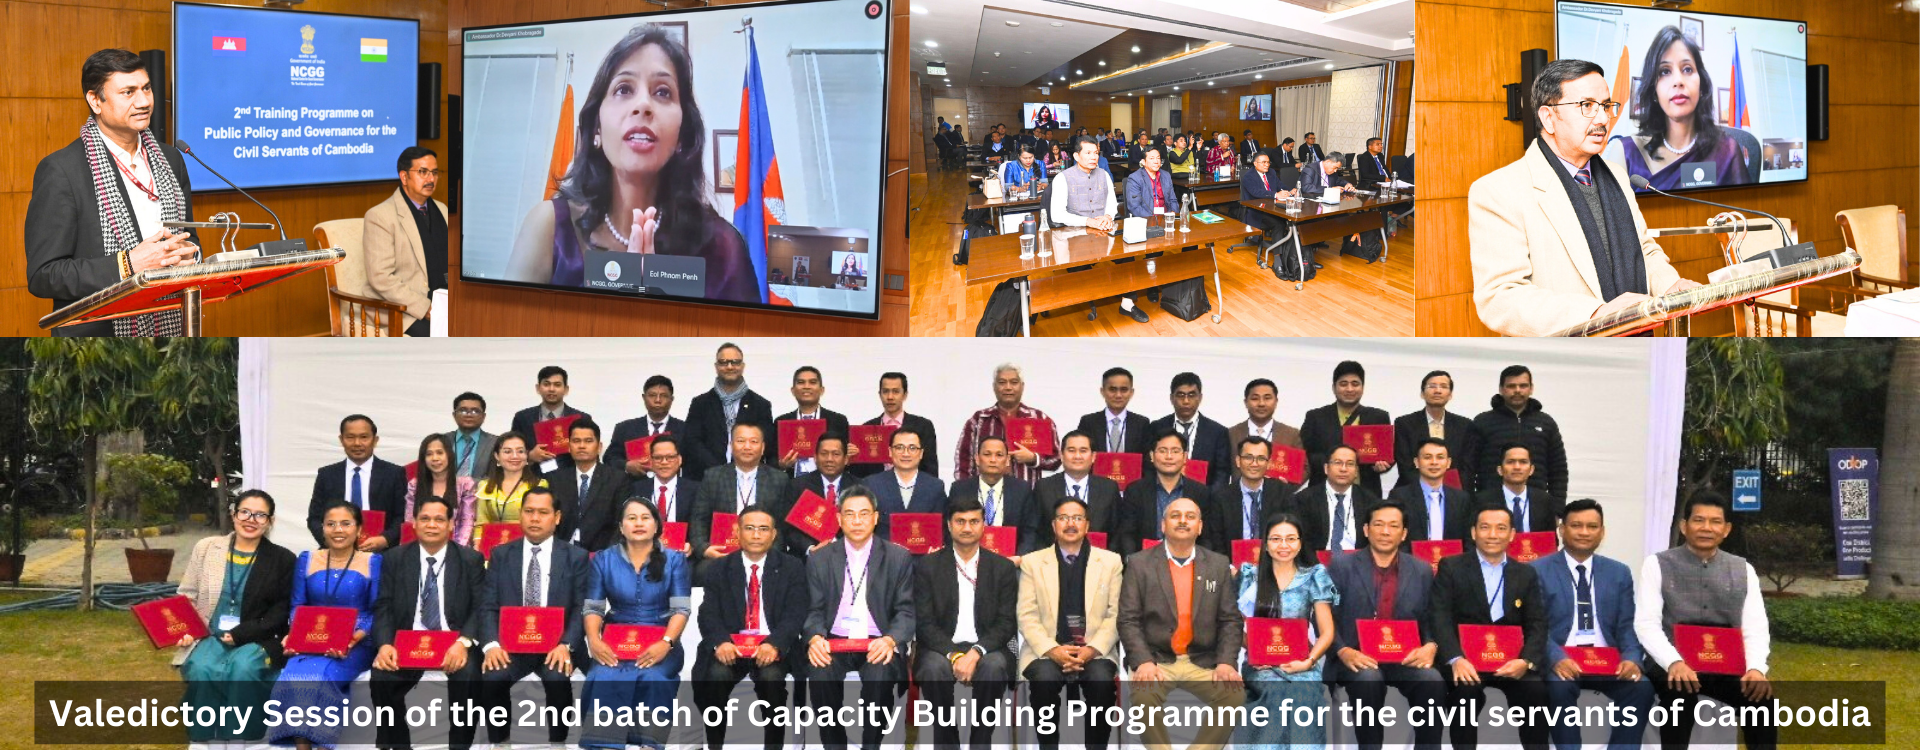 Valedictory Session of the 2nd batch of Capacity Building Programme for the civil servants of Cambodia